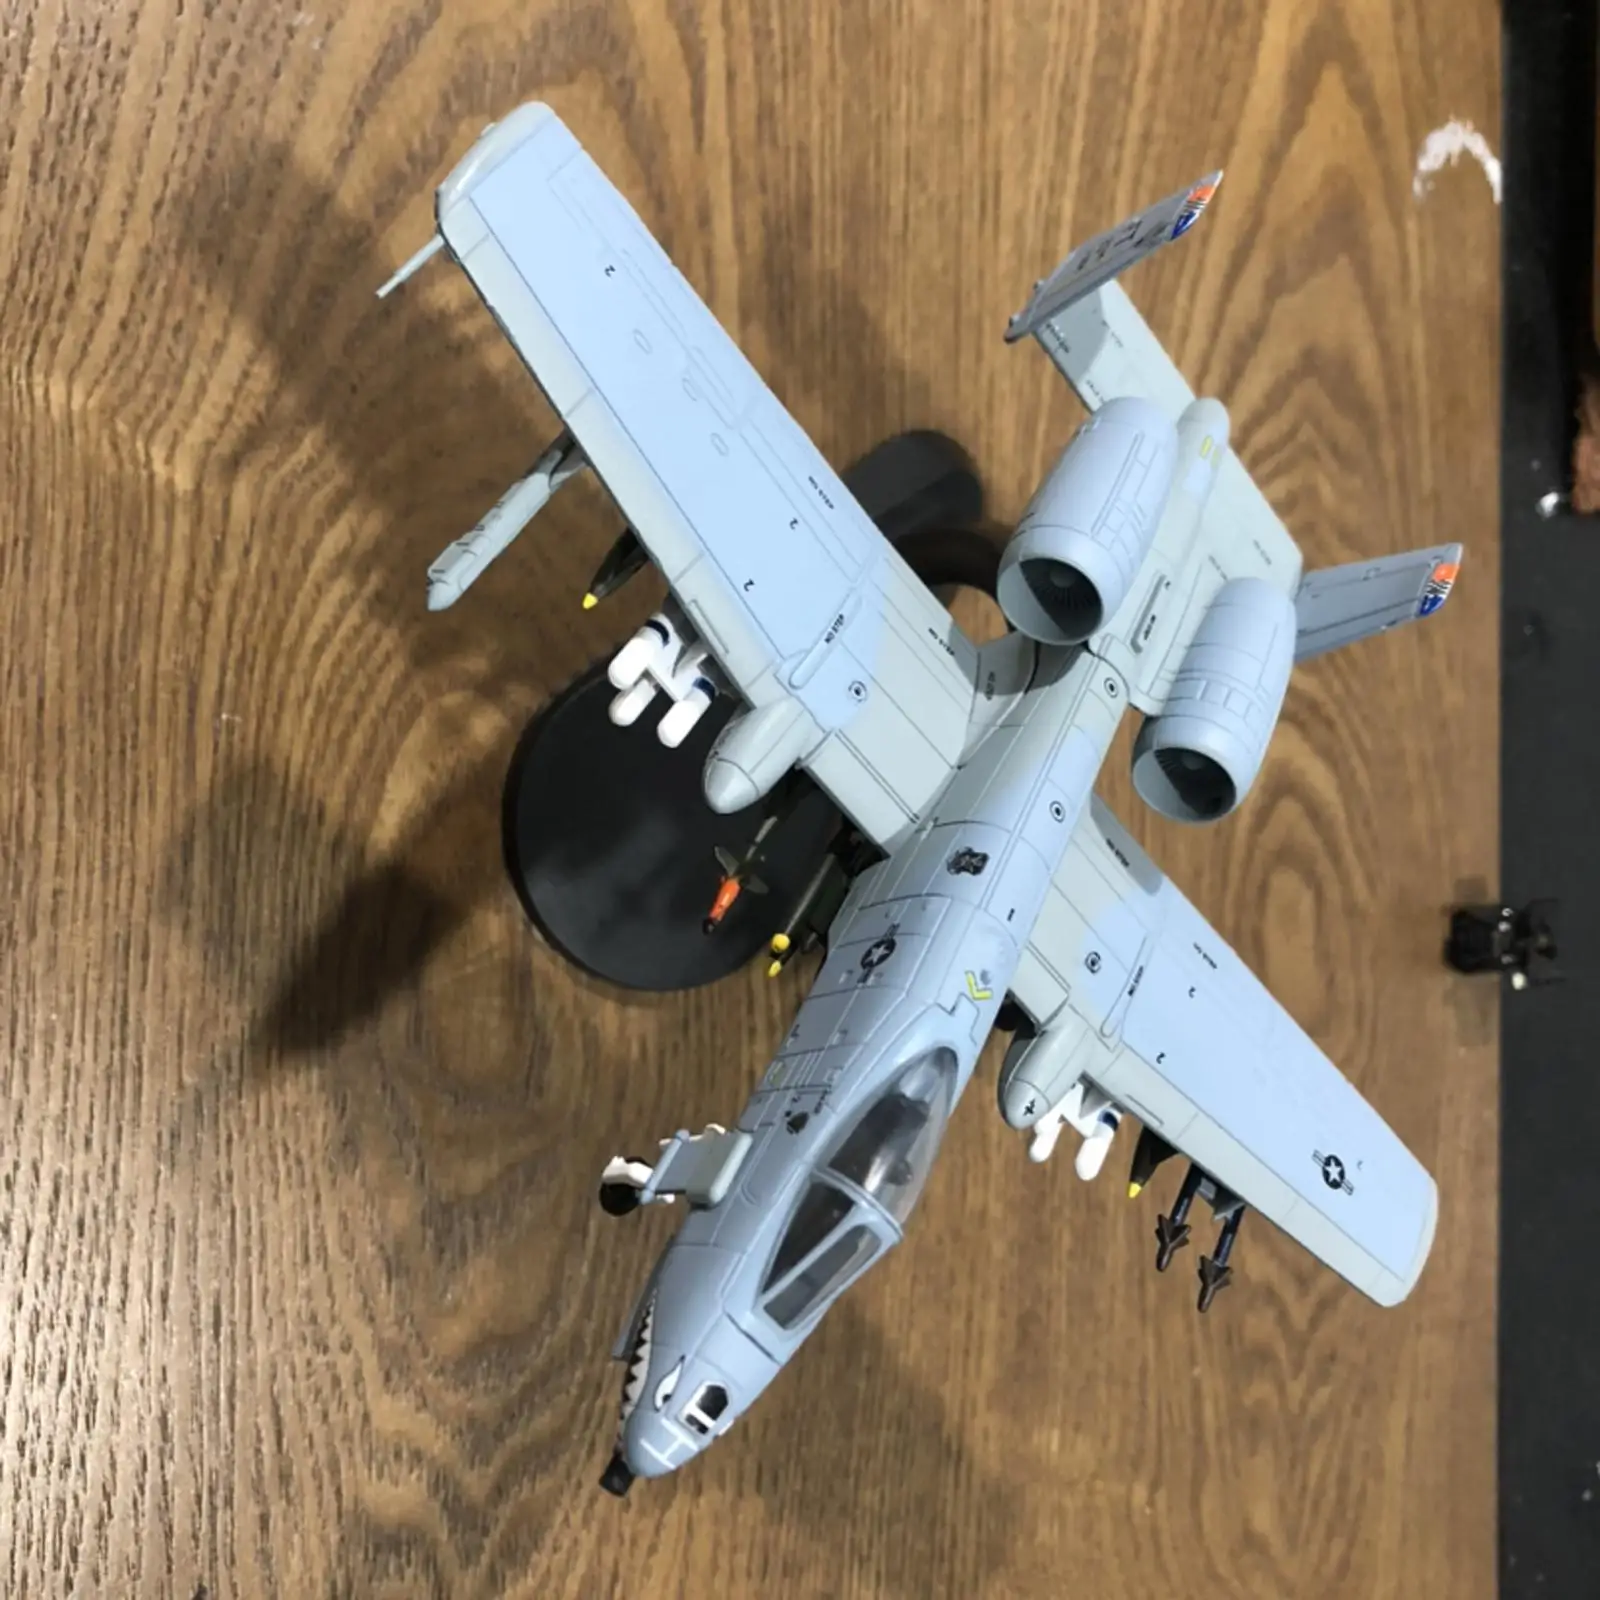 Baoblaze USA A-10 Attacker Aircraft 1:100 Scale Warthog Diecast Display Model with Stand Home Office Decoration or Gift